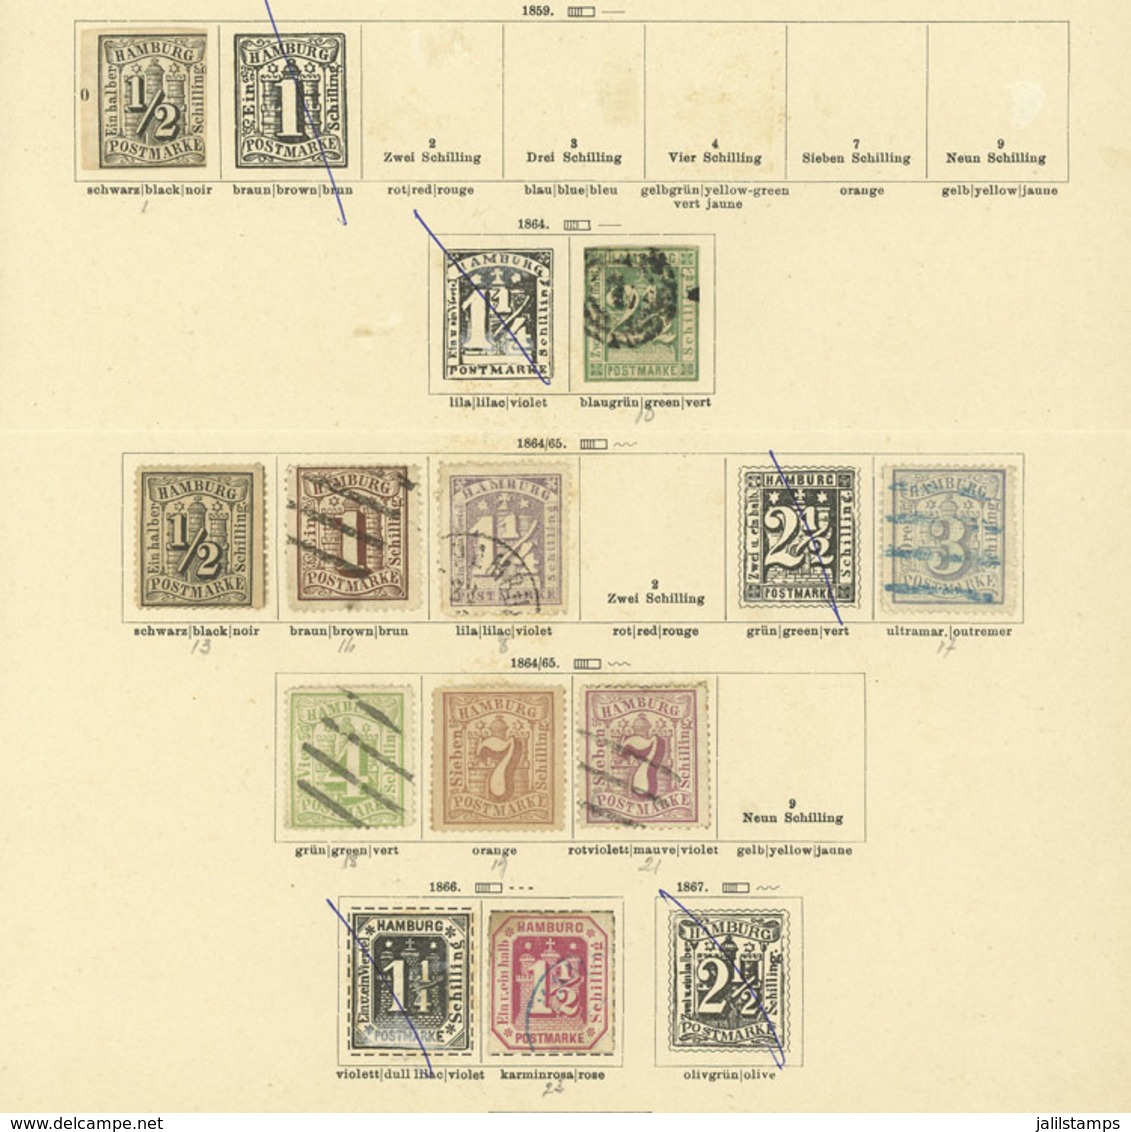 GERMANY: Page Of An Old Album With Used Or Mint Stamps, Several With Minor Faults, Scott Catalog Value US$450+ - Hamburg